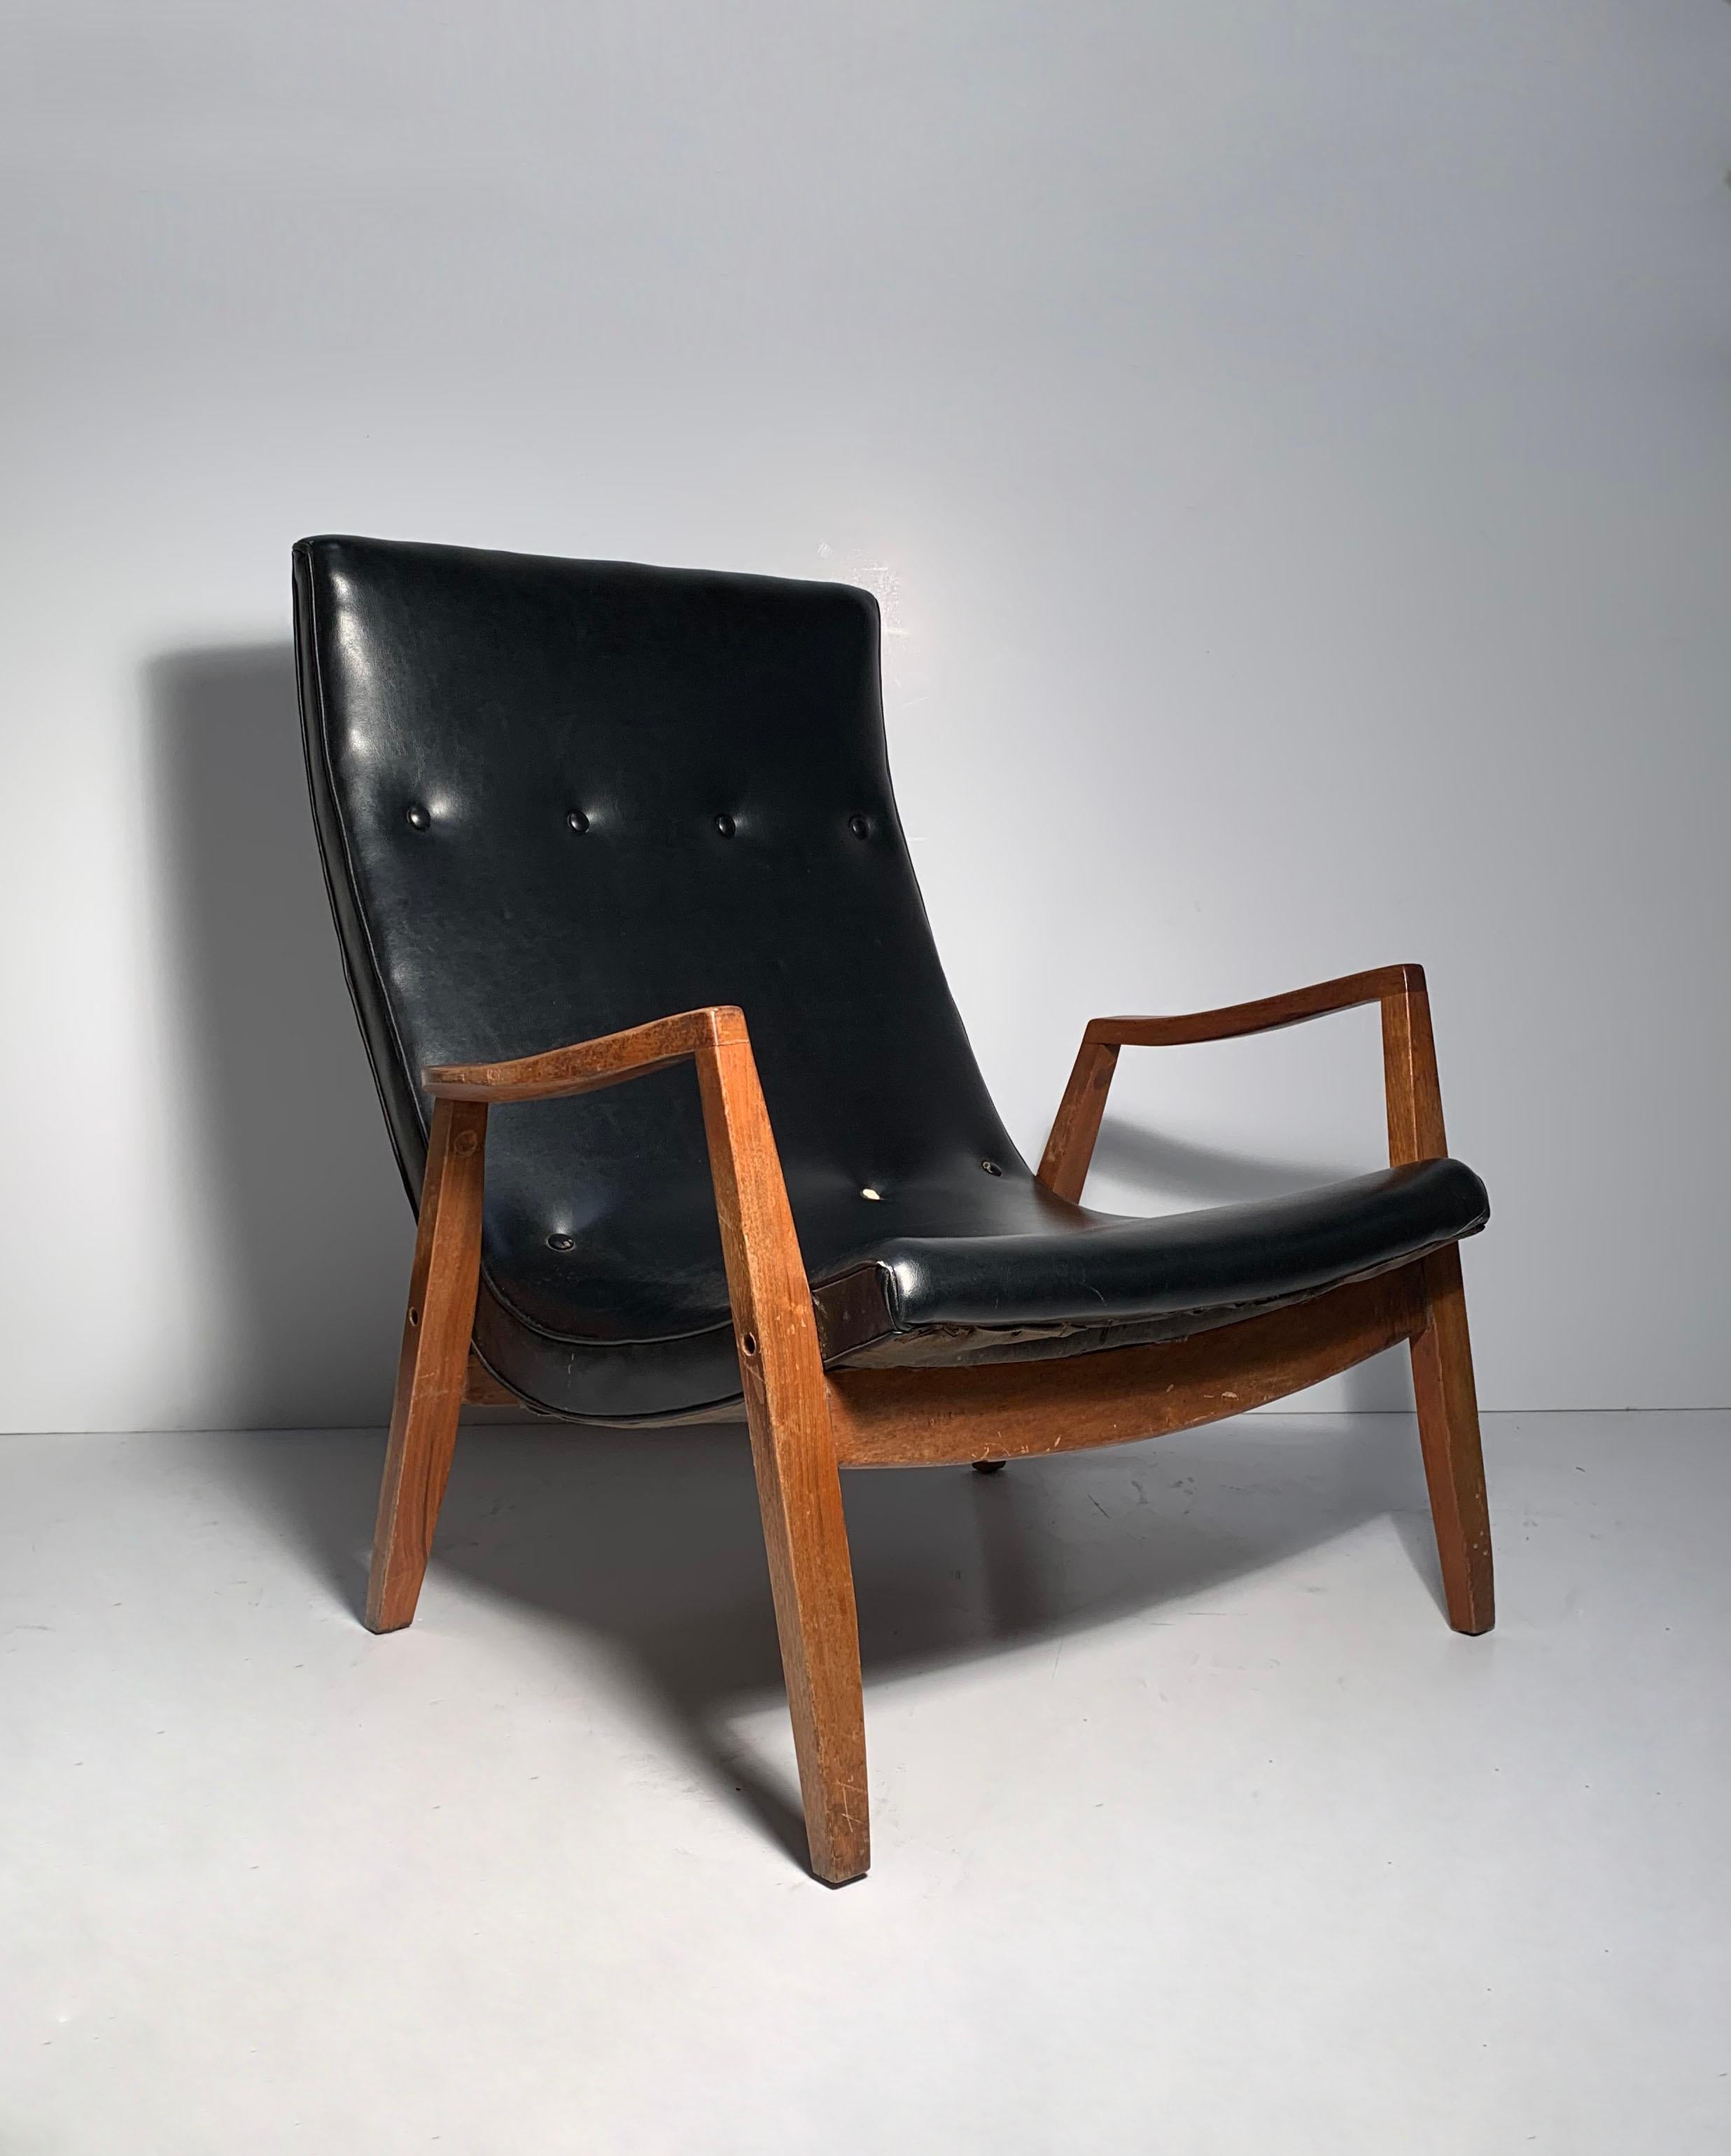 Milo Baughman pair of scoop lounge chairs

Wood frames need some minor restoration and refinishing is probably desirable with these.

Black upholstery is original. Missing a couple buttons which should be an easy fix. otherwise not bad as-is.